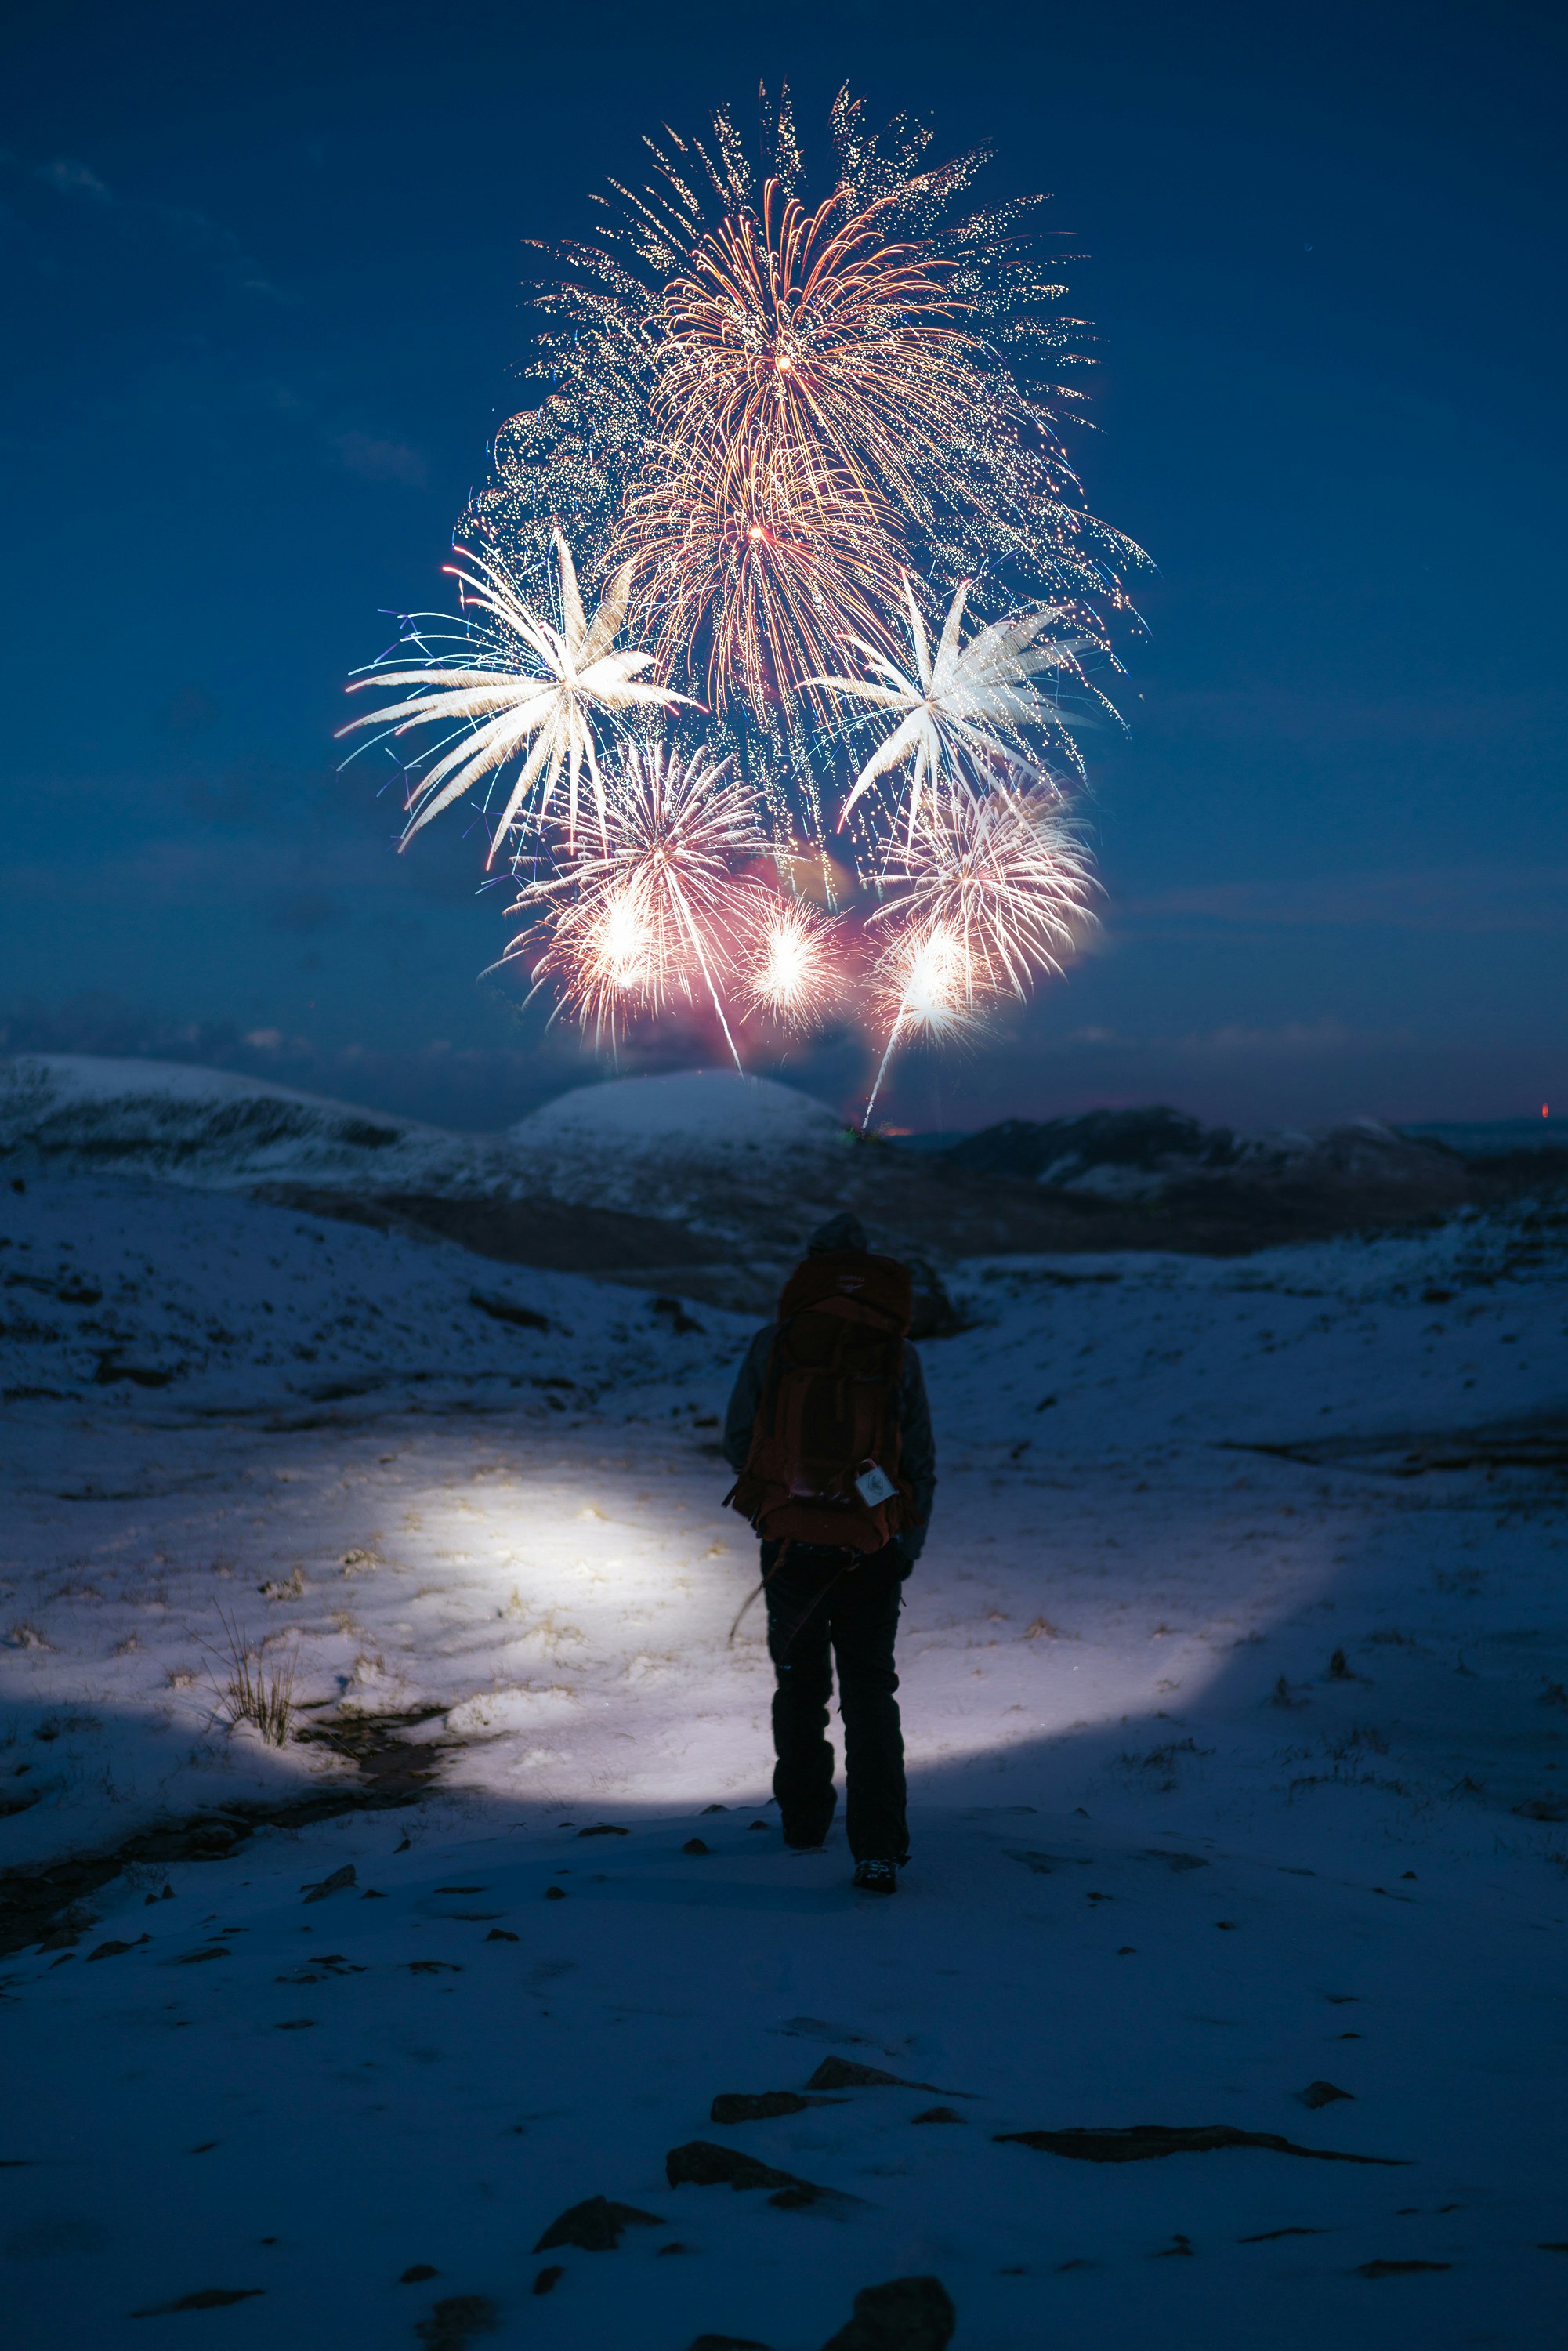 silhouette of person facing fireworks at nightime